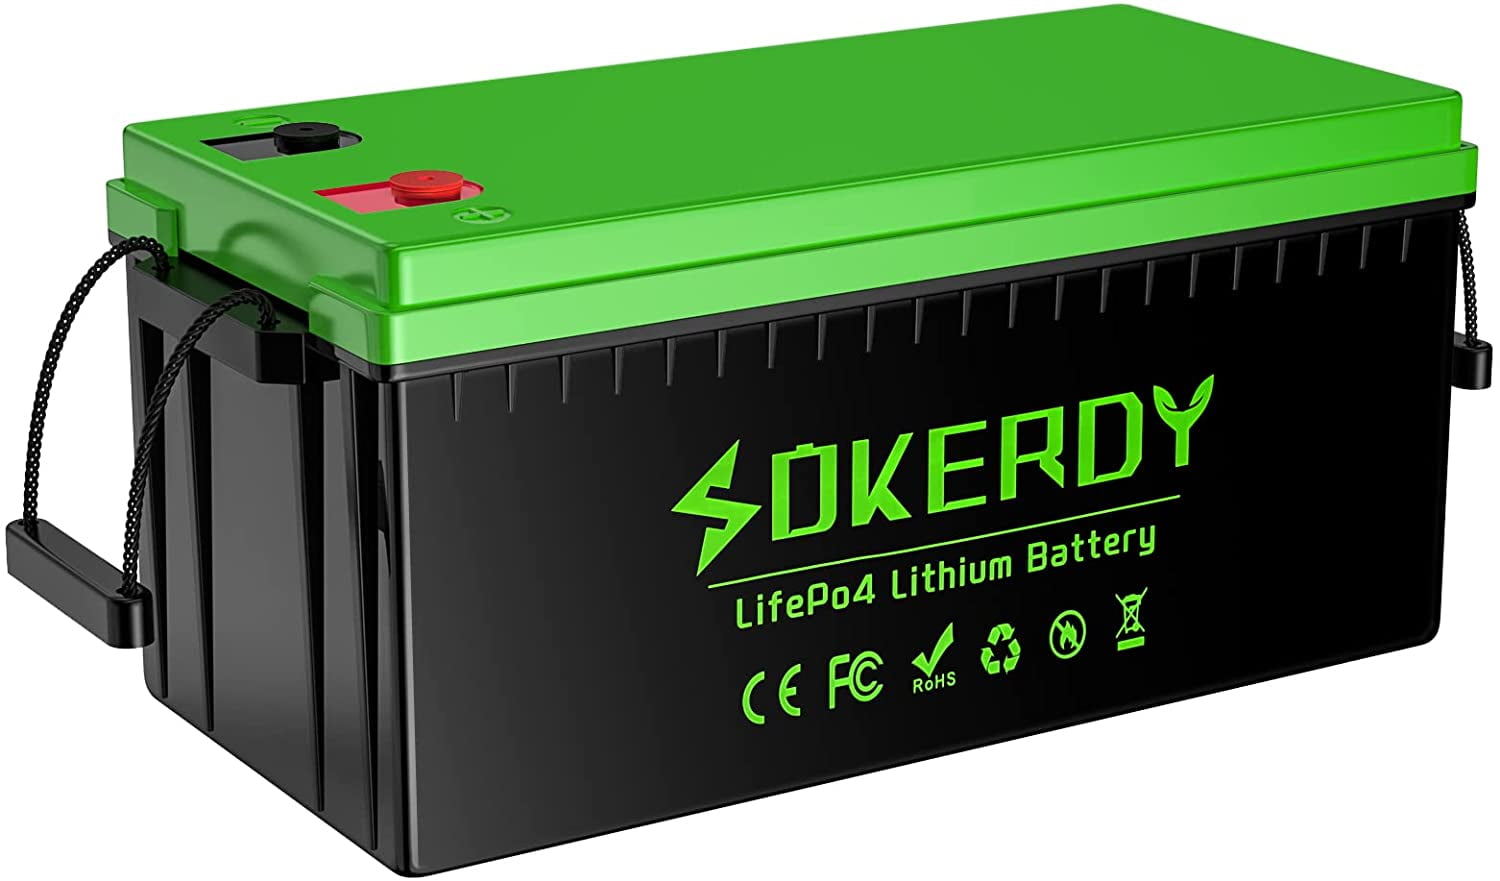  Redodo 4 Pack 12V 100Ah Mini LiFePO4 Lithium Battery, 1280Wh  Deep Cycle Battery with Upgraded 100A BMS, 4000-15000 Cycles, Perfect for  Boat, Solar Home, RV, Off-Grid, Trolling Motor : Automotive